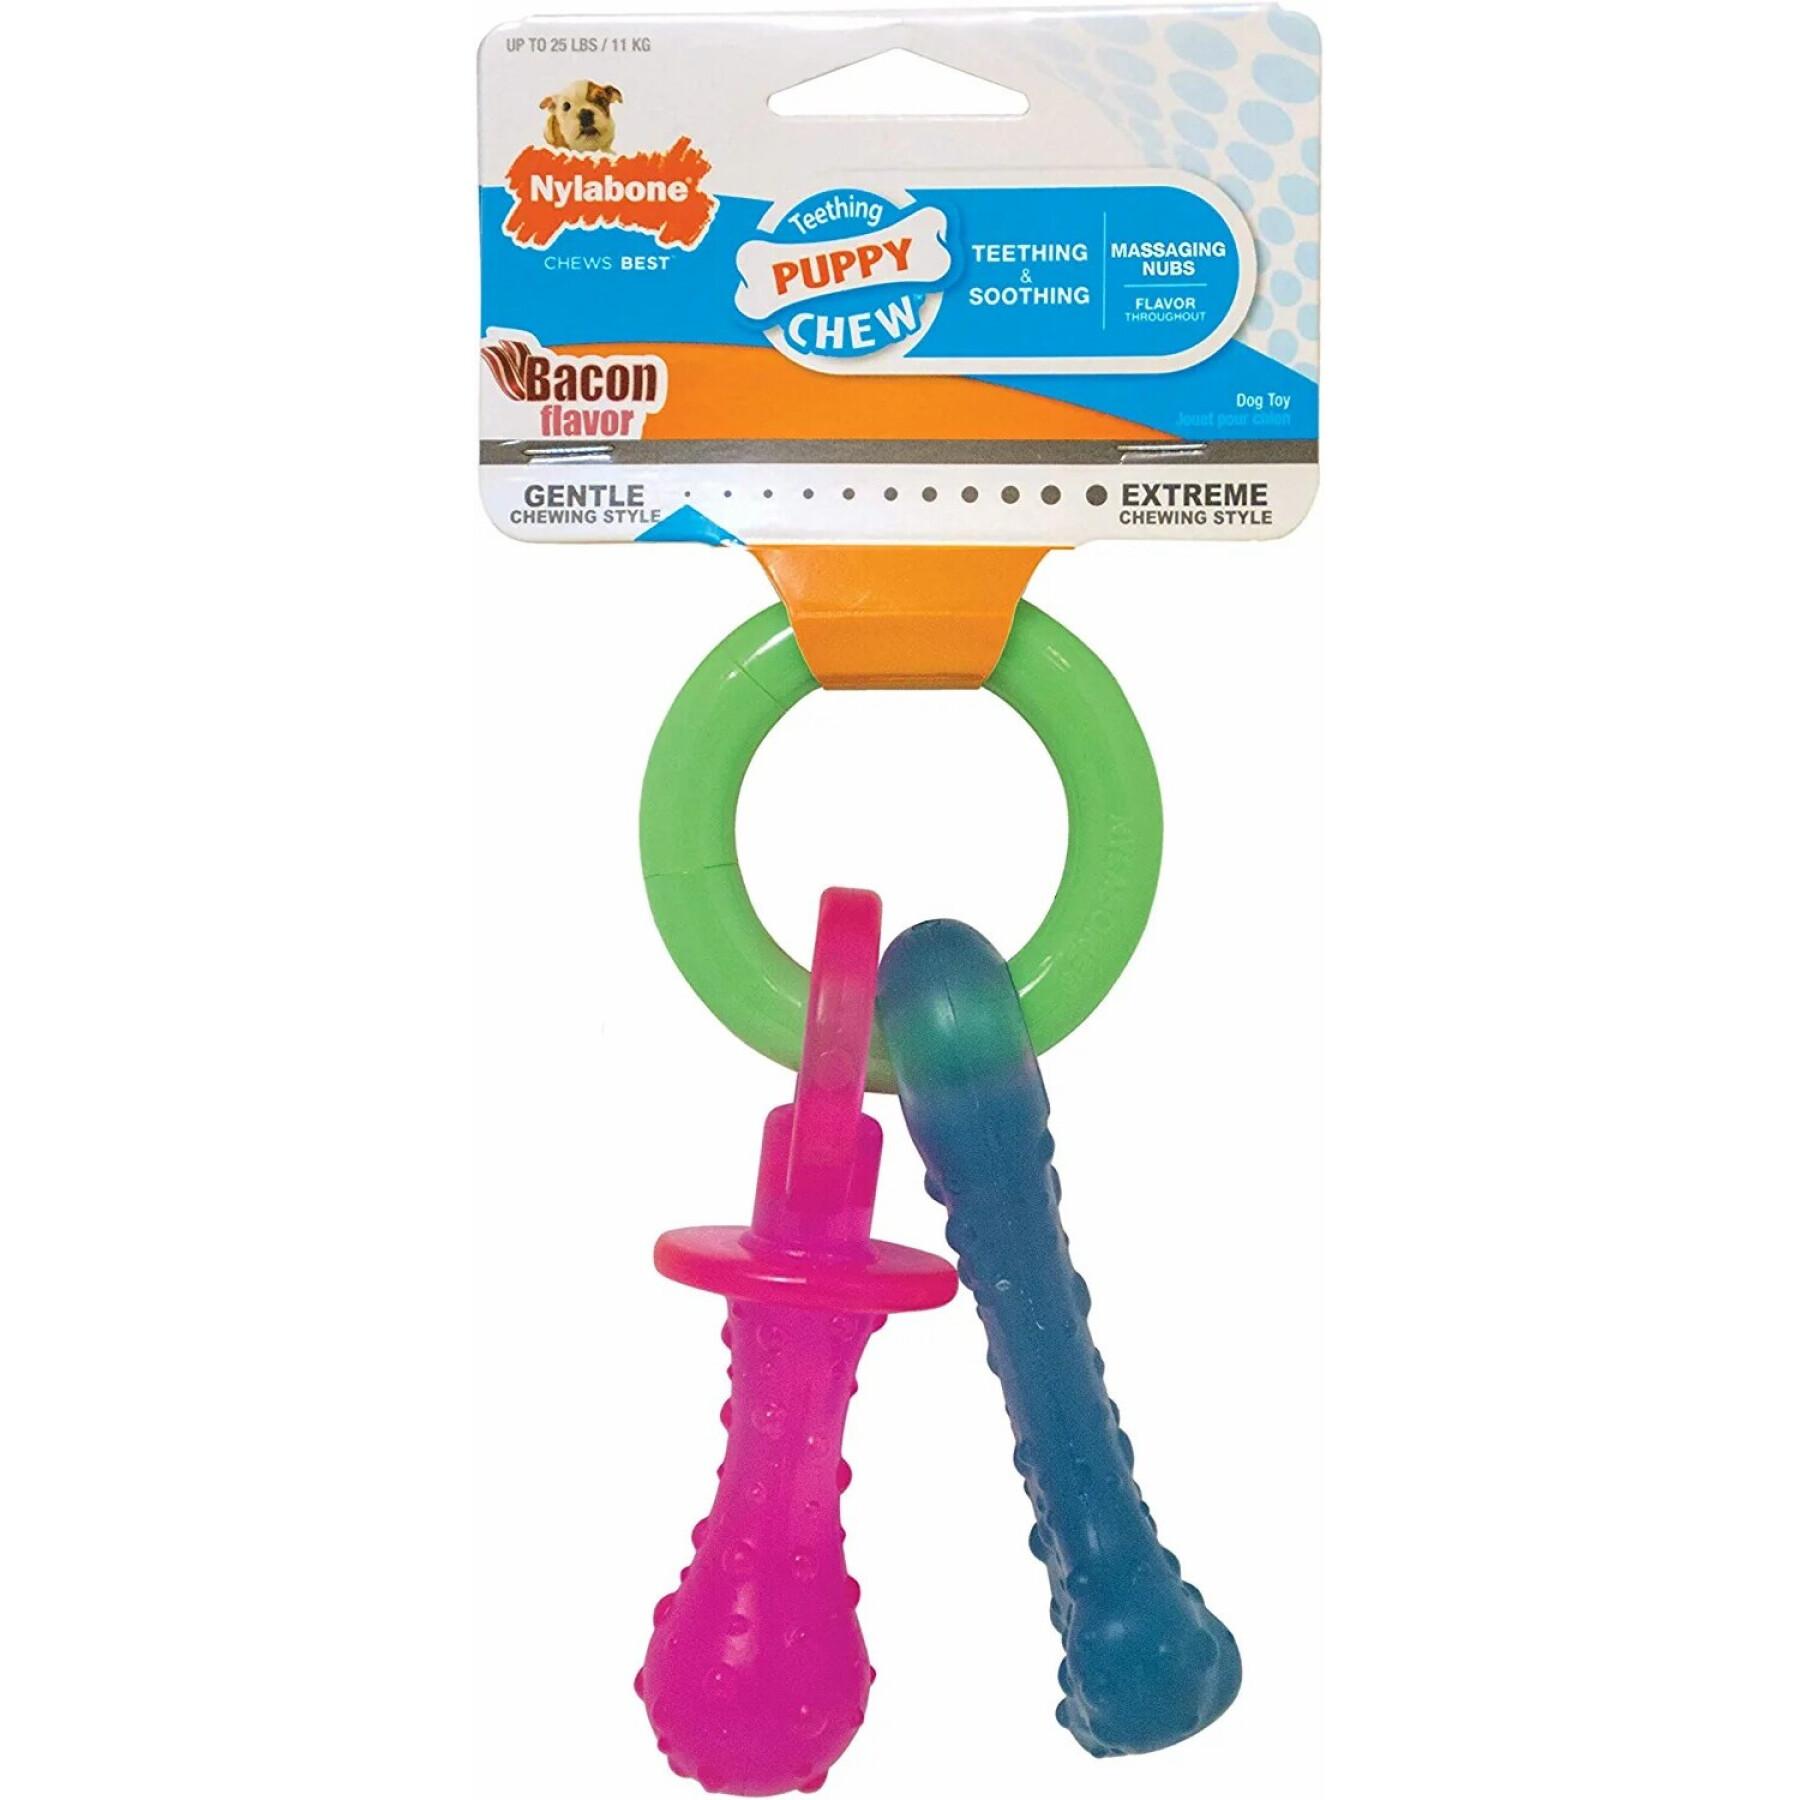 Dog toy Nylabone Puppy Teething Pacifier - Bacon XS